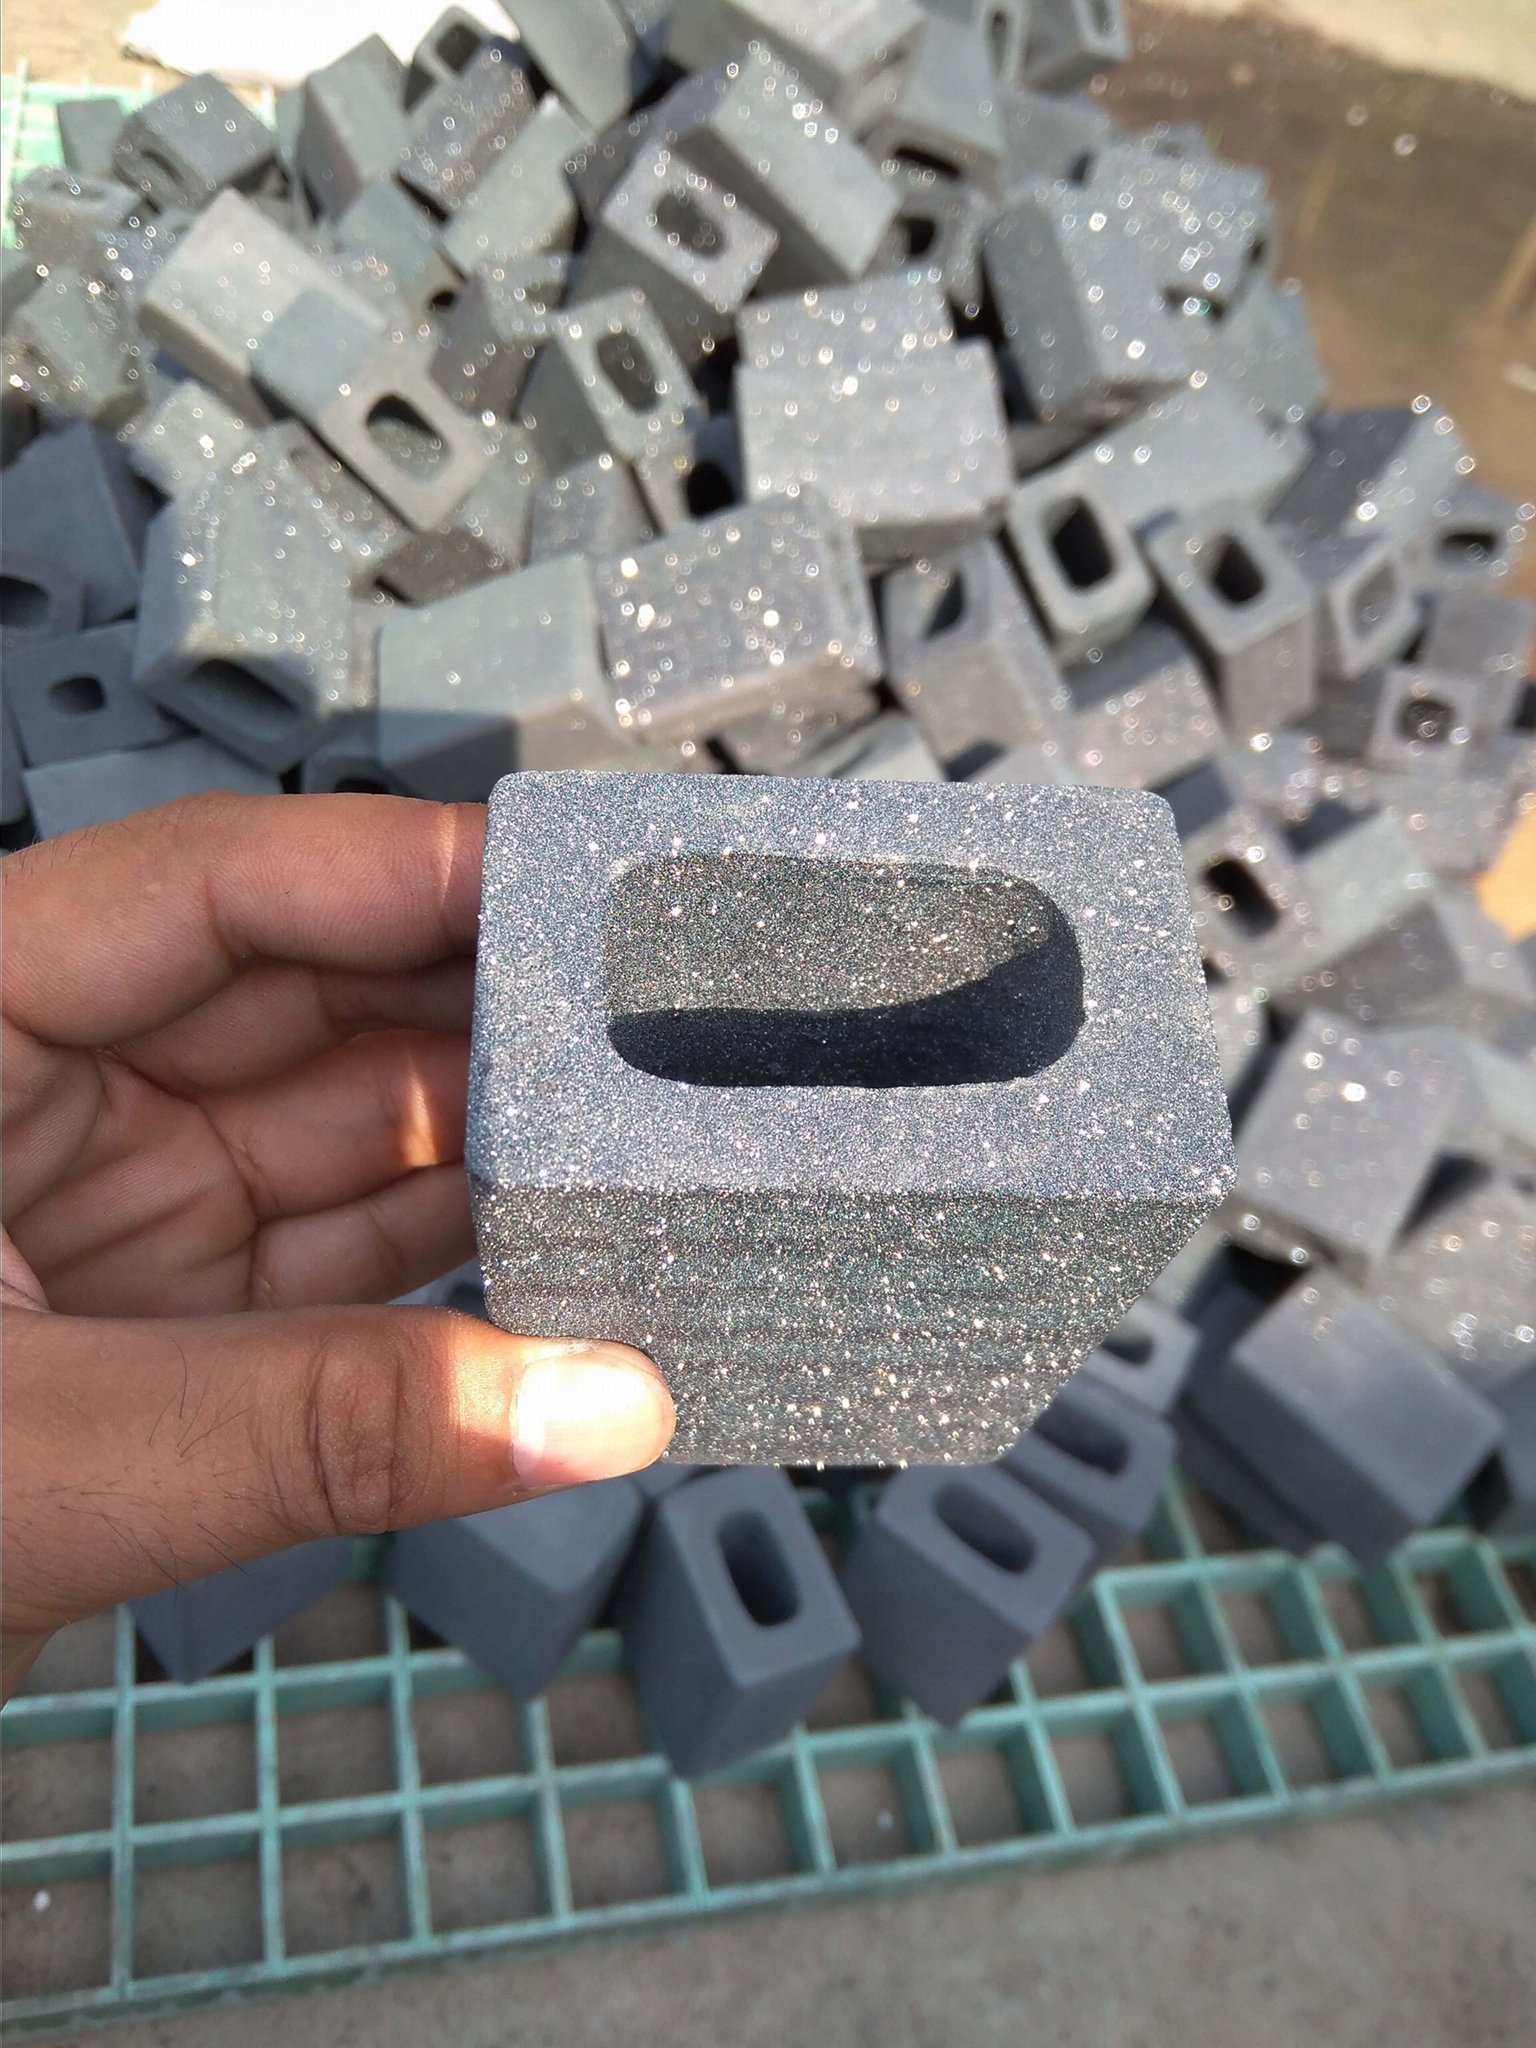 RSiC Supports, ReSiC pillars, recrystallized silicon carbide square tubes 5